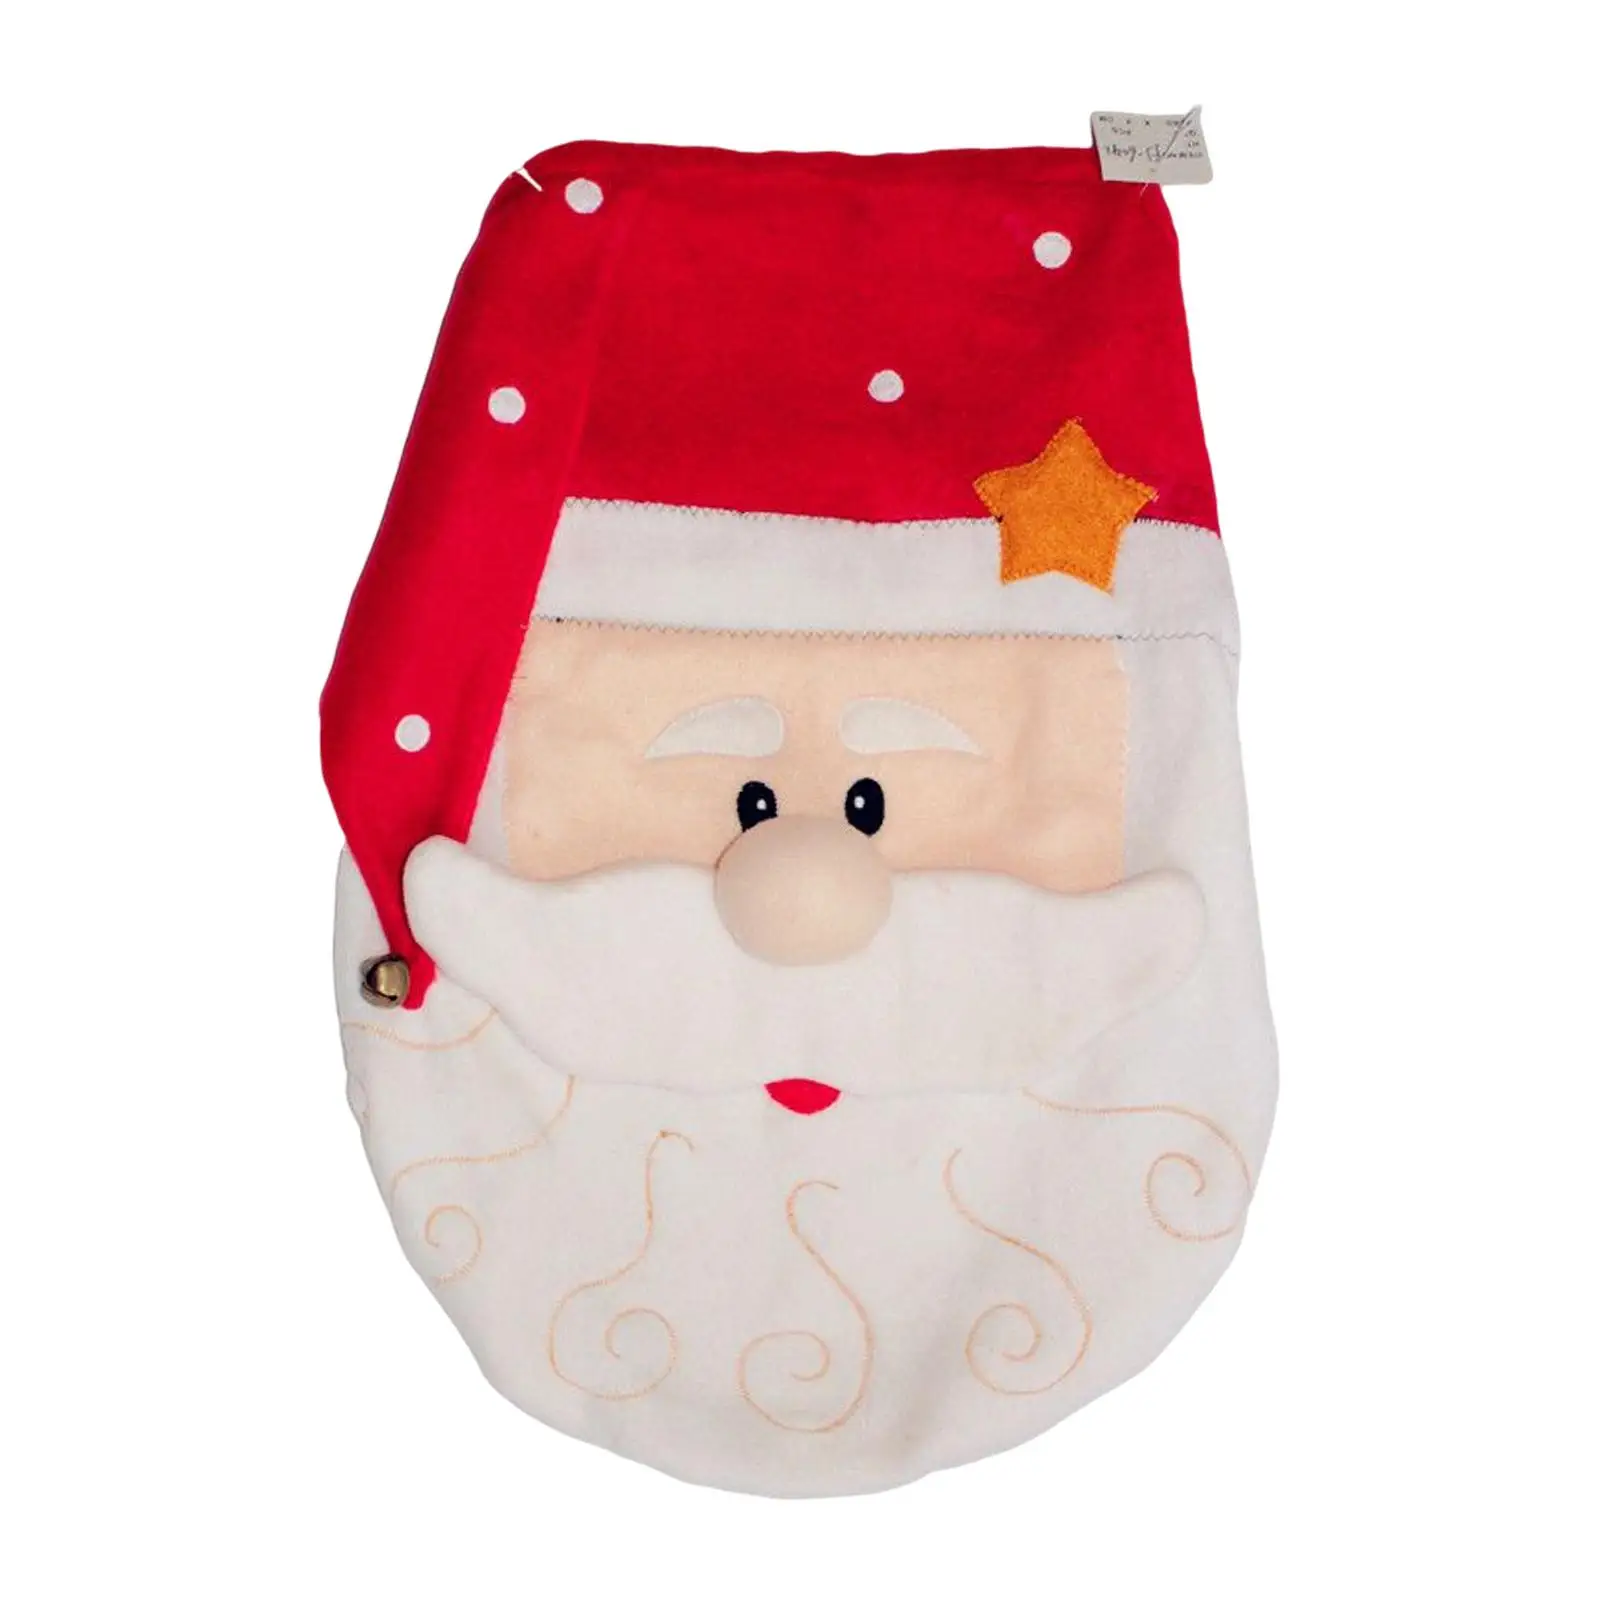 Fancy Toilet Seat Cover, Christmas, Red Mat, Ornament, Supplies, Lid Cover, for